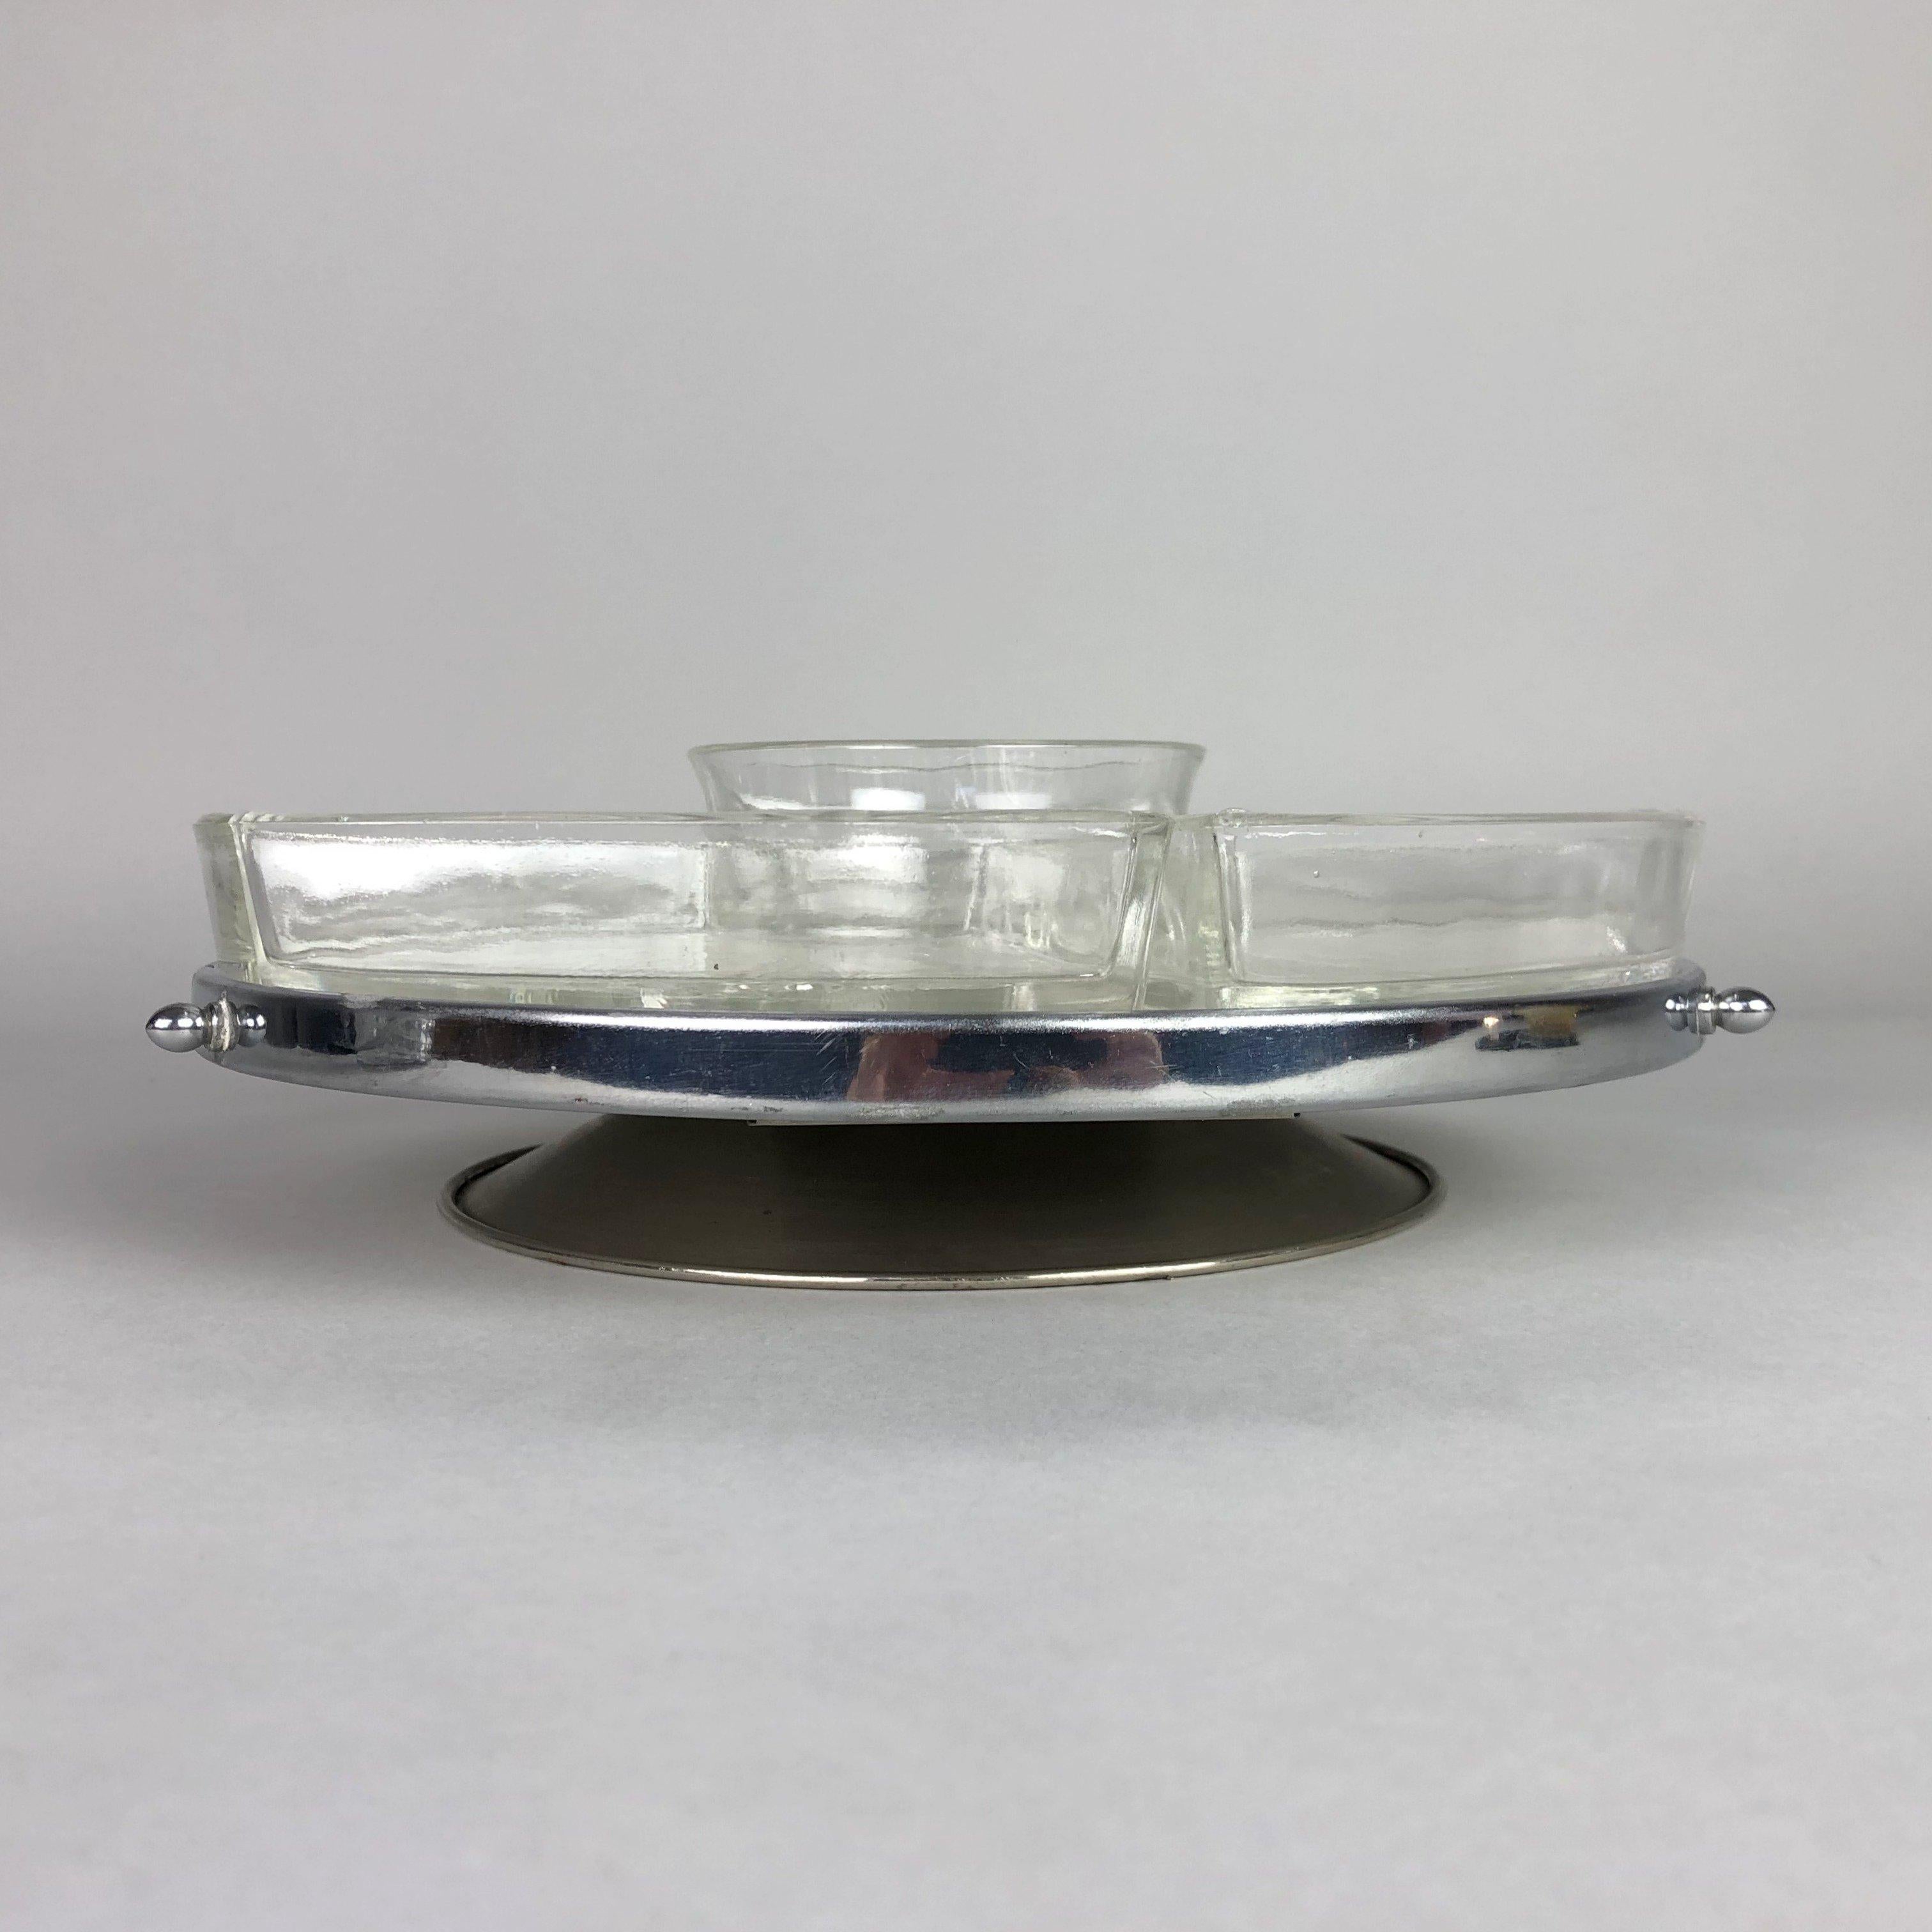 Art Deco rotating 'Lazy Susan' tray. There are 4 glass containers and one round bowl in the middle. If you remove all the glass, you can use it as a cake platter. Good vintage condition, there are just some scratches in the silver part of the